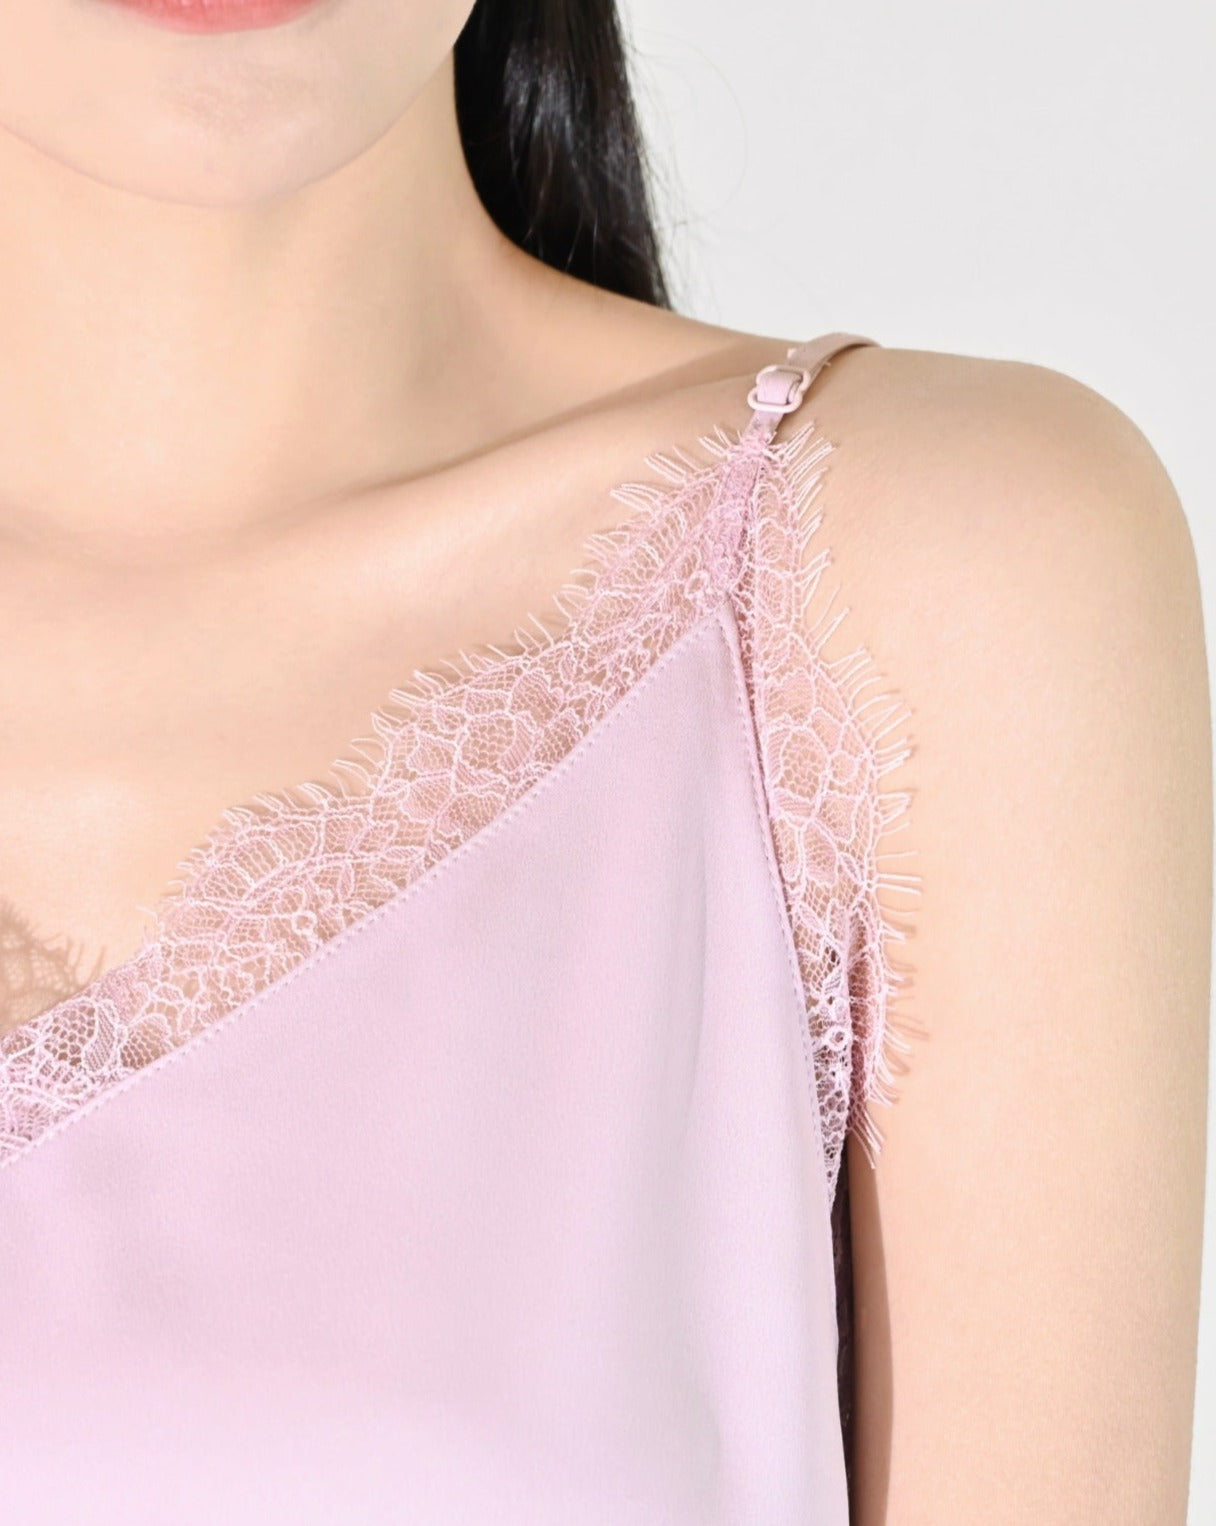 Load image into Gallery viewer, aalis CAMILA lace camisole (Light purple pink)
